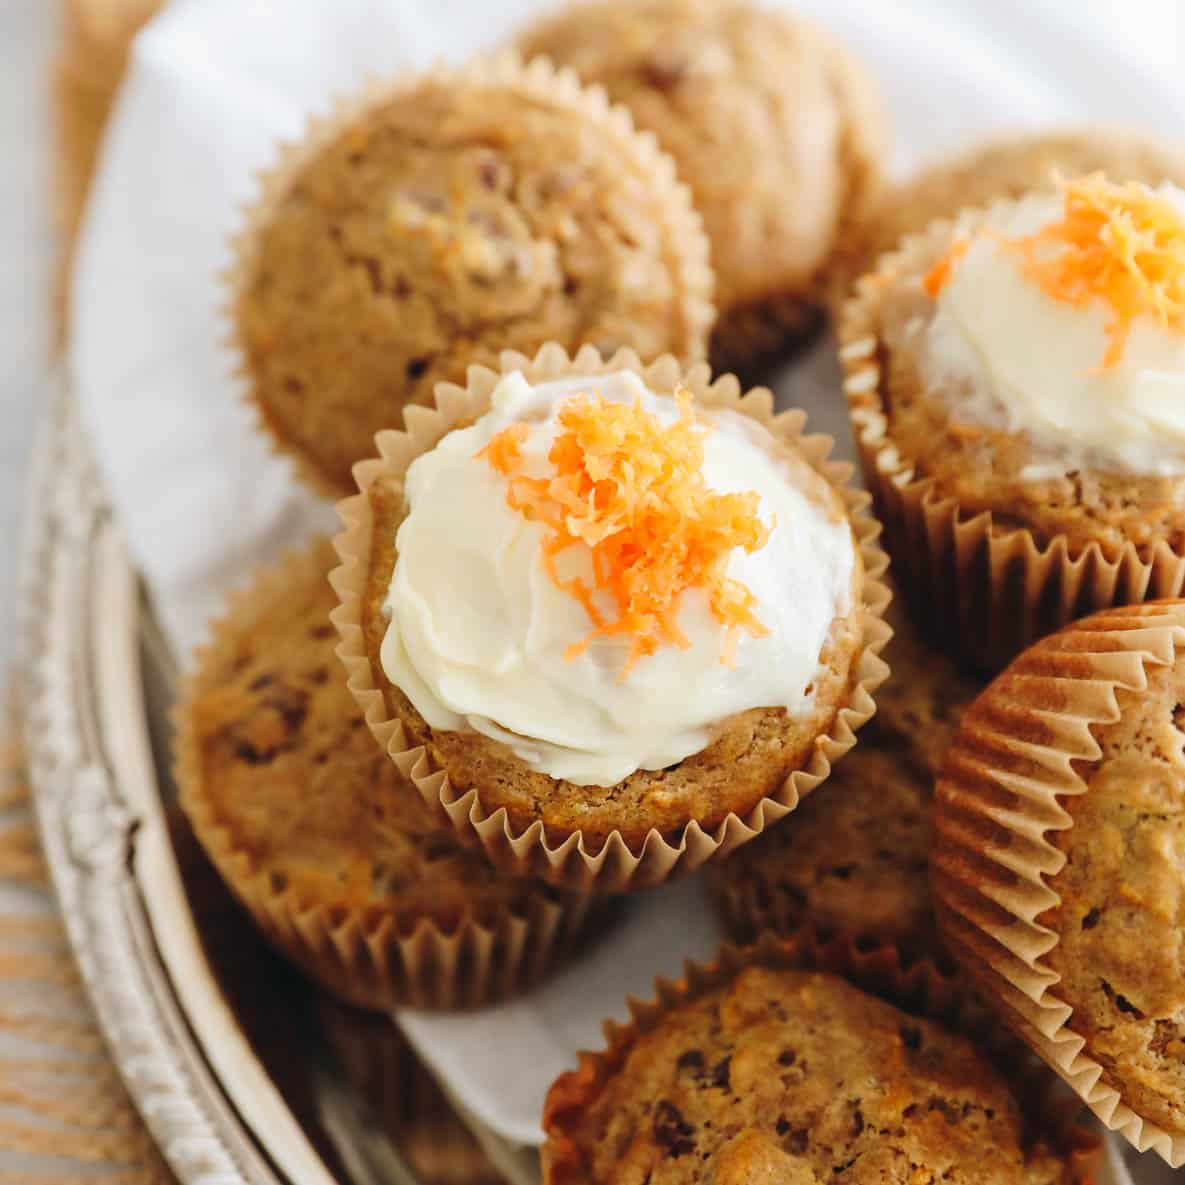 https://www.thehealthymaven.com/wp-content/uploads/2023/03/carrot-cake-muffins-11.jpg